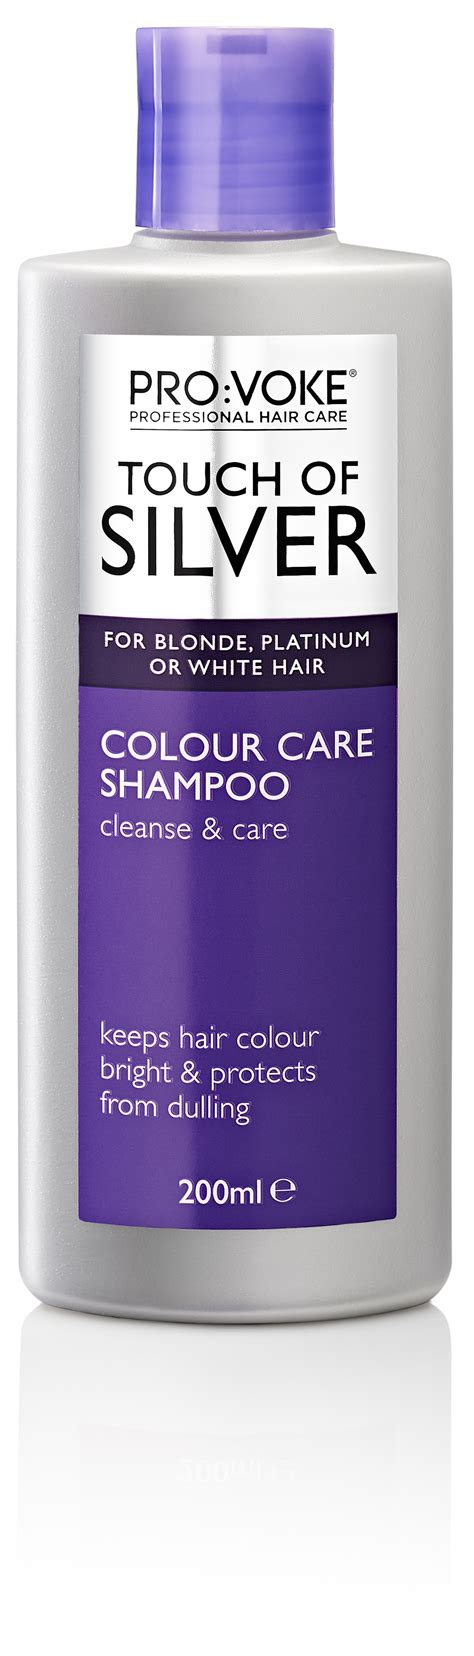 Silver Hair Products Grey Hair Products Blonde Hair